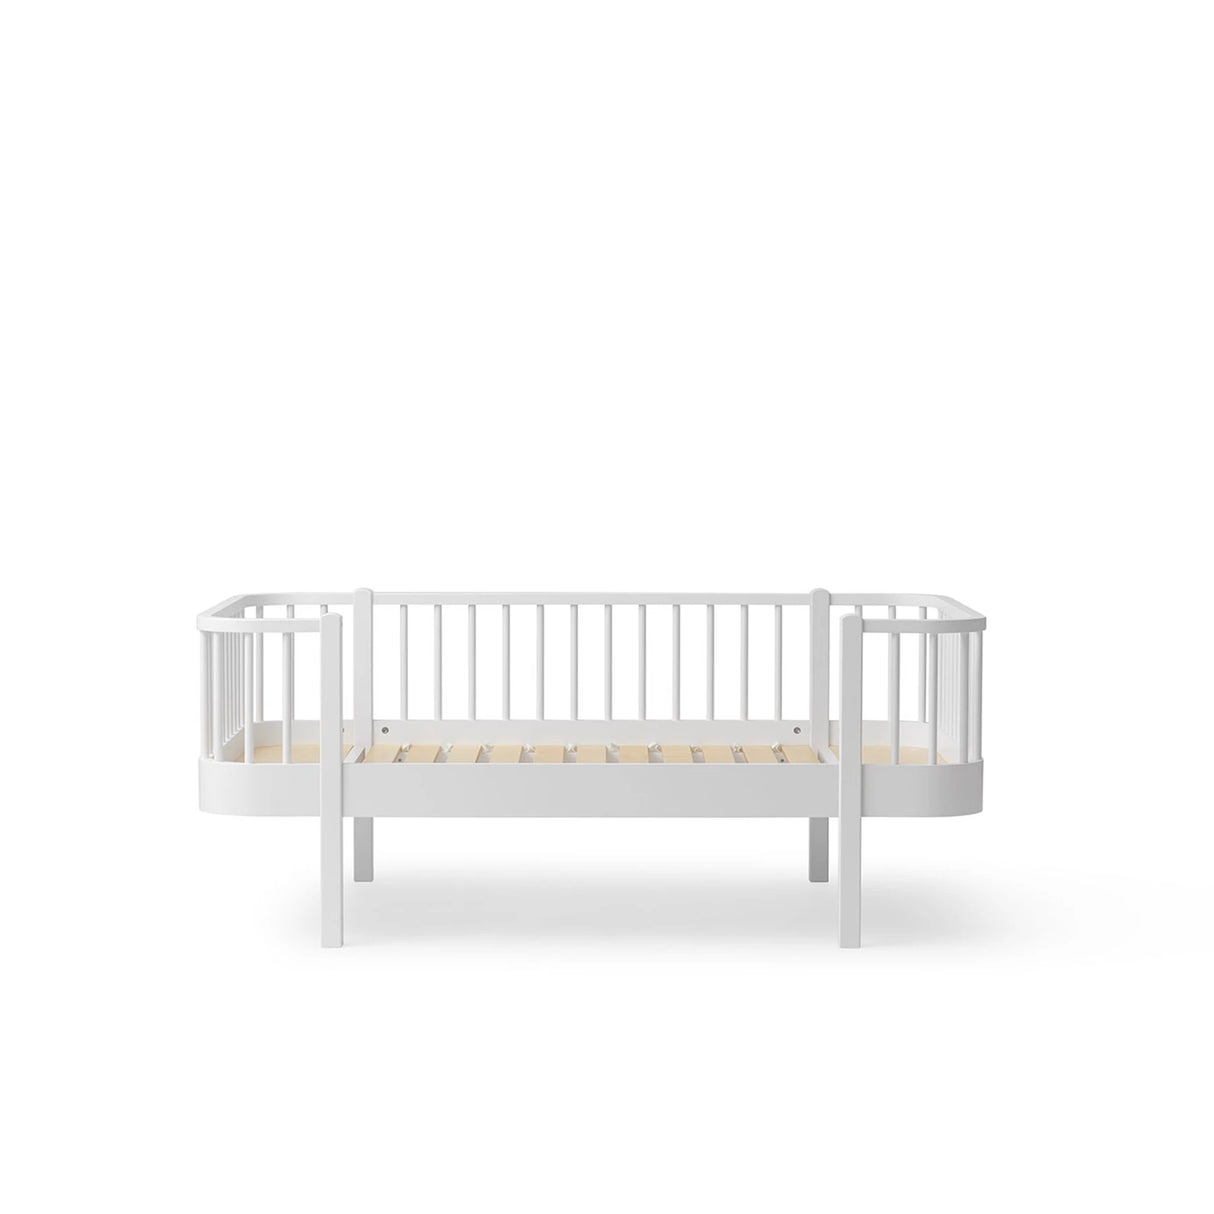 FREE Installation - Oliver Furniture Wood Original Junior Day Bed in White - Little Snoozes